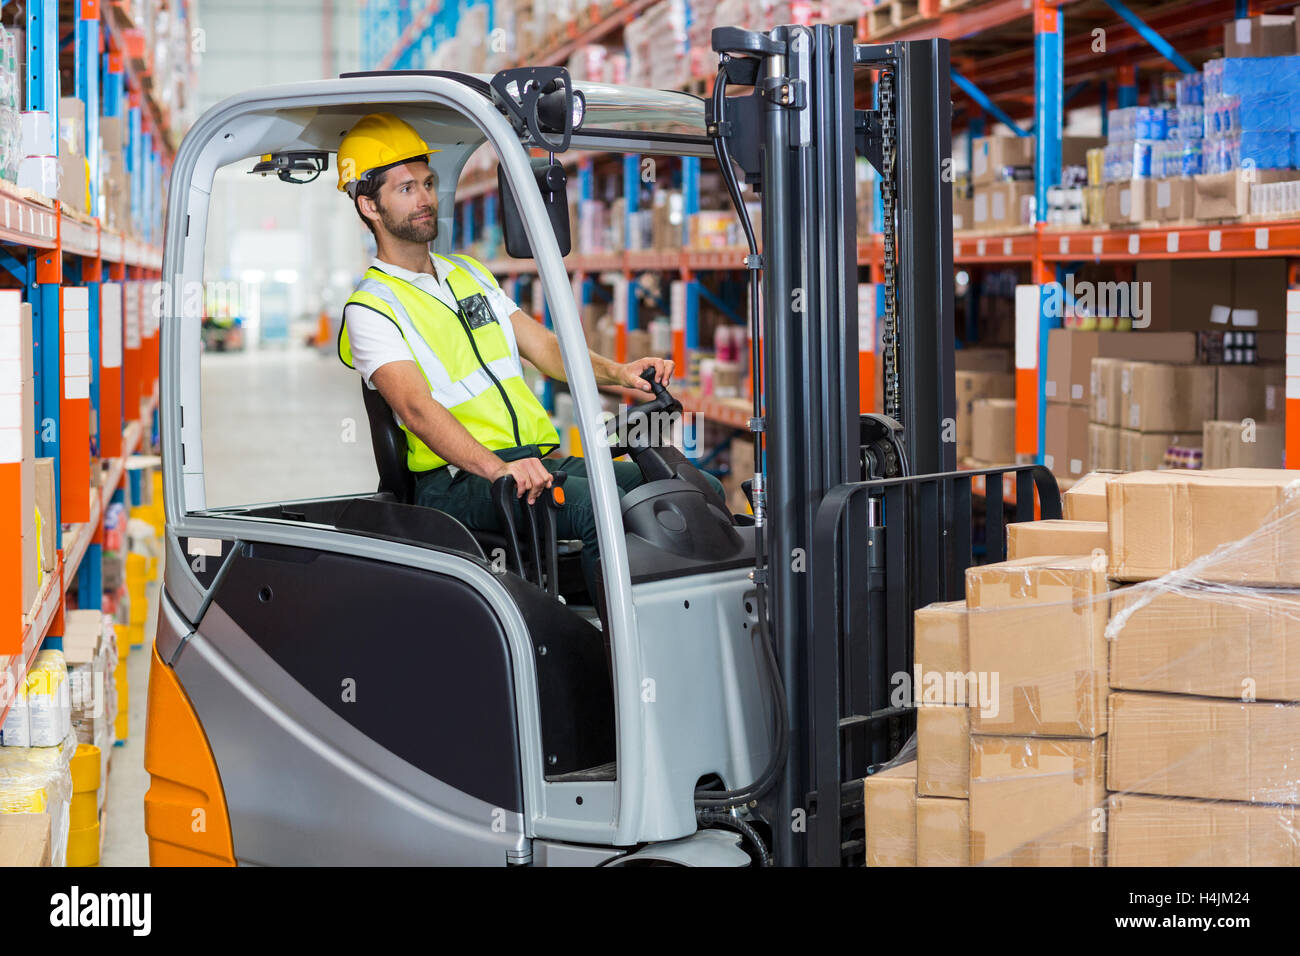 Male worker using forklift Stock Photo